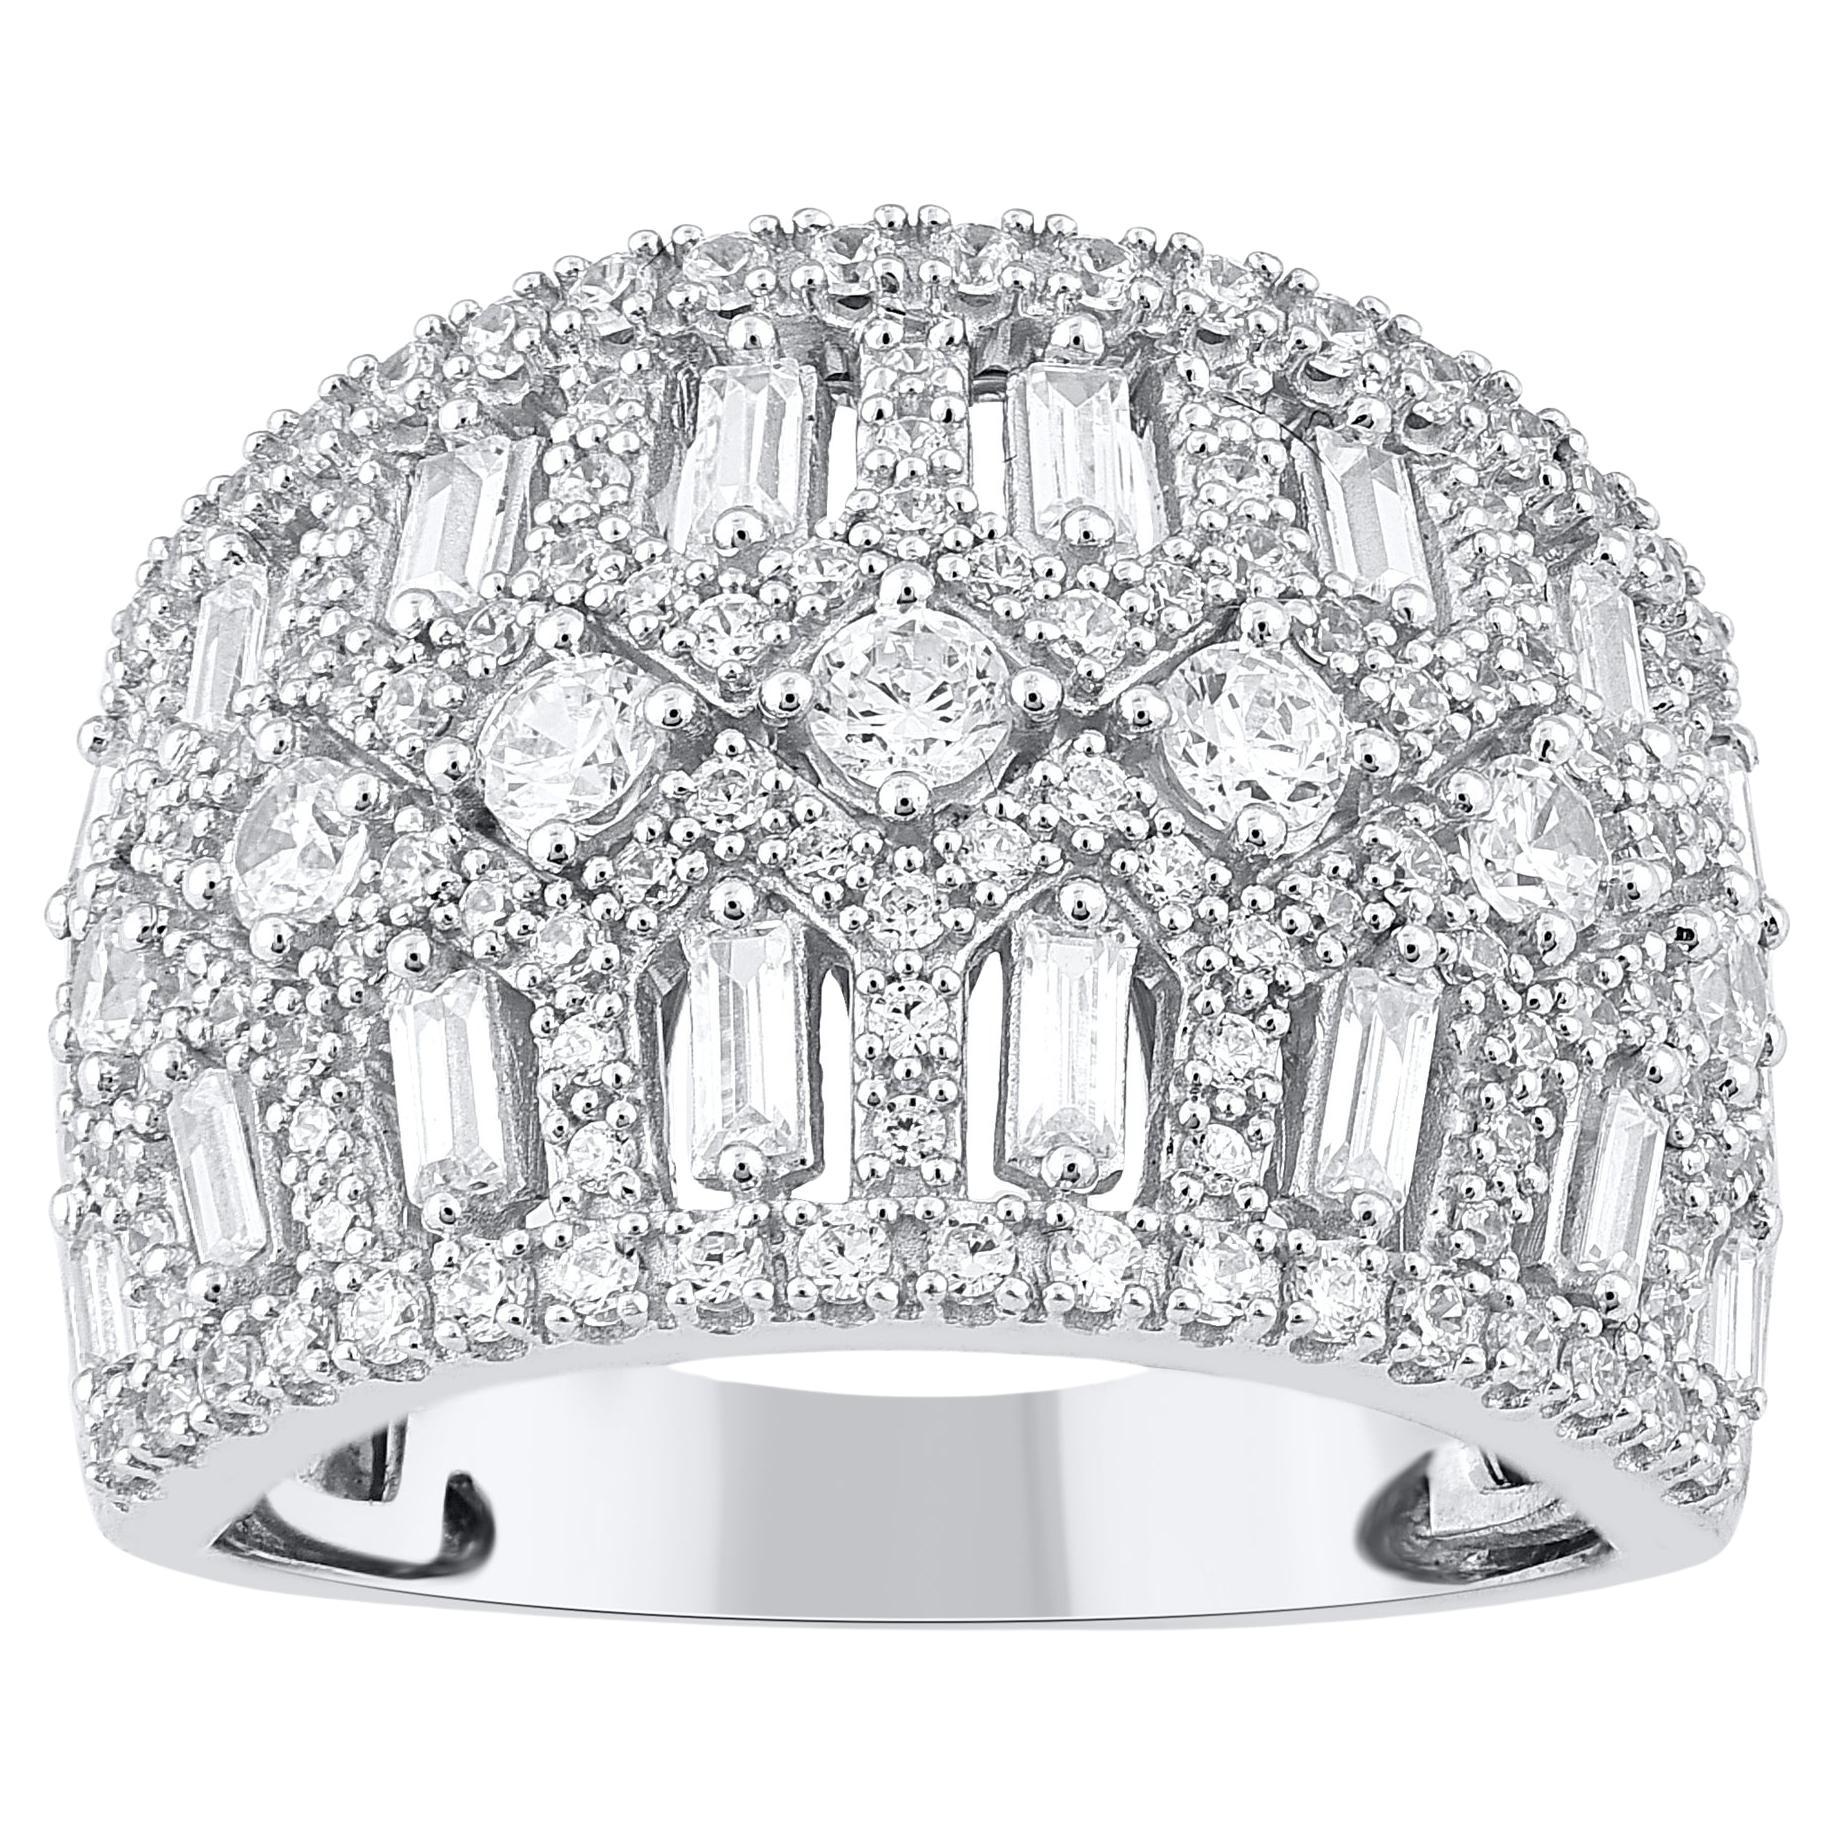 Honor the women you love with this designer diamond band. These diamond ring are studded with 145 single cut, brilliant cut and baguette diamonds in prong setting and crafted in 14kt white gold. The white diamonds are graded as H-I color and I2